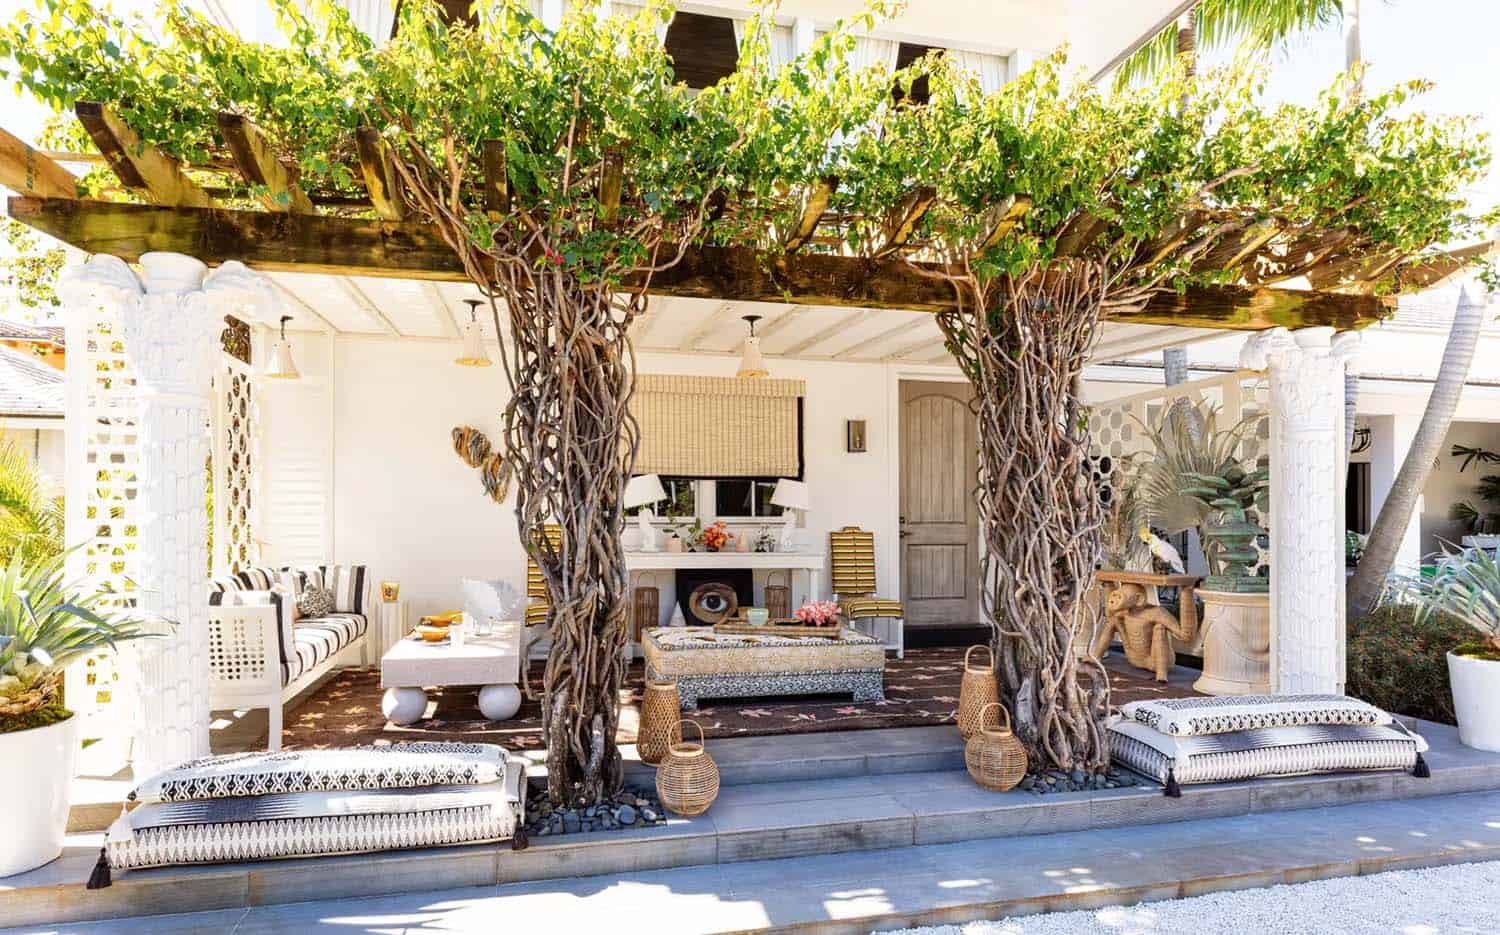 dining-terrace-with-a-pergola-and-vines